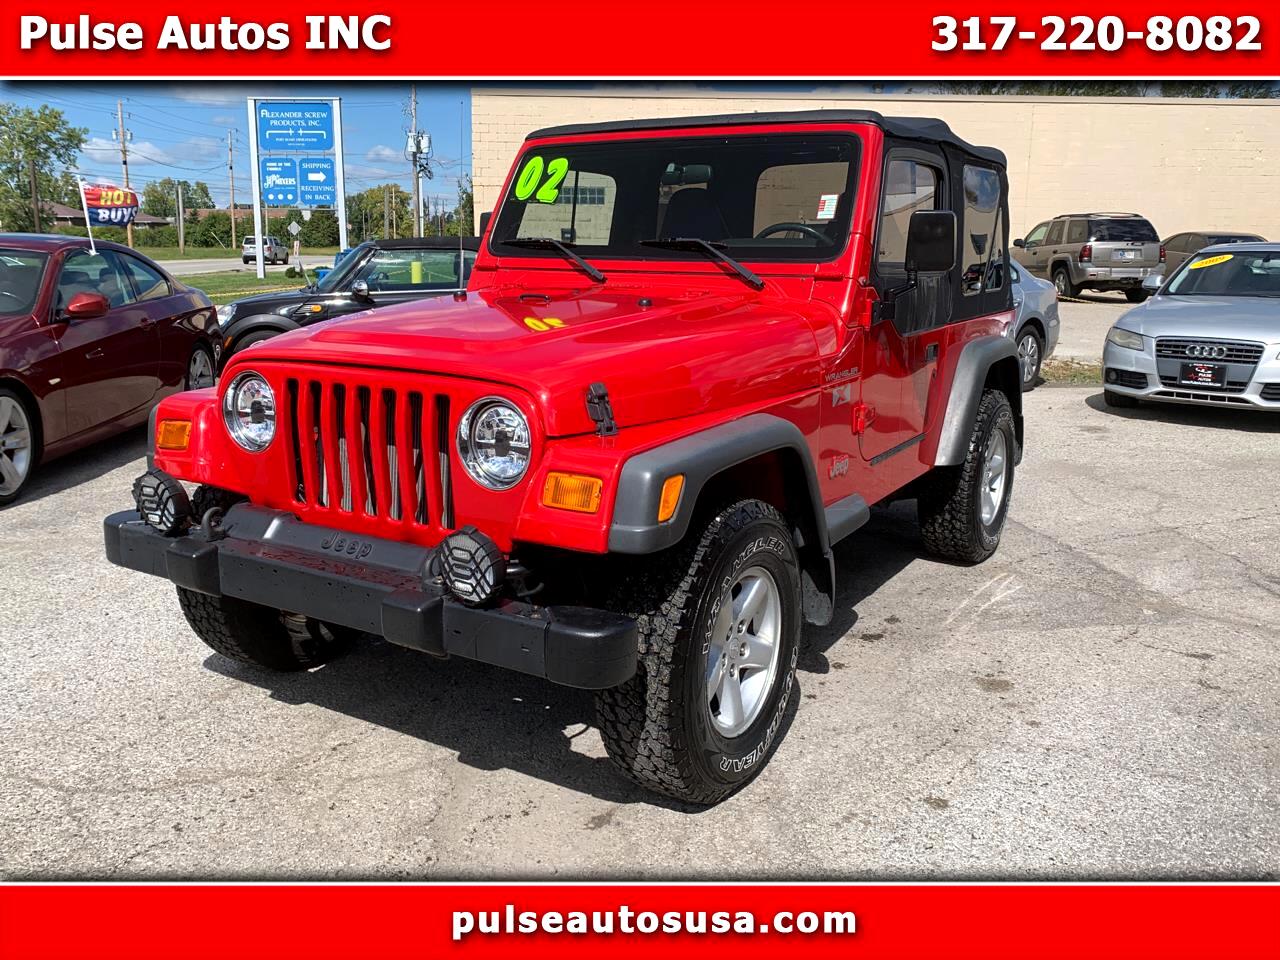 Used 2002 Jeep Wrangler X for Sale in Indianapolis IN 46226 Pulse Autos INC